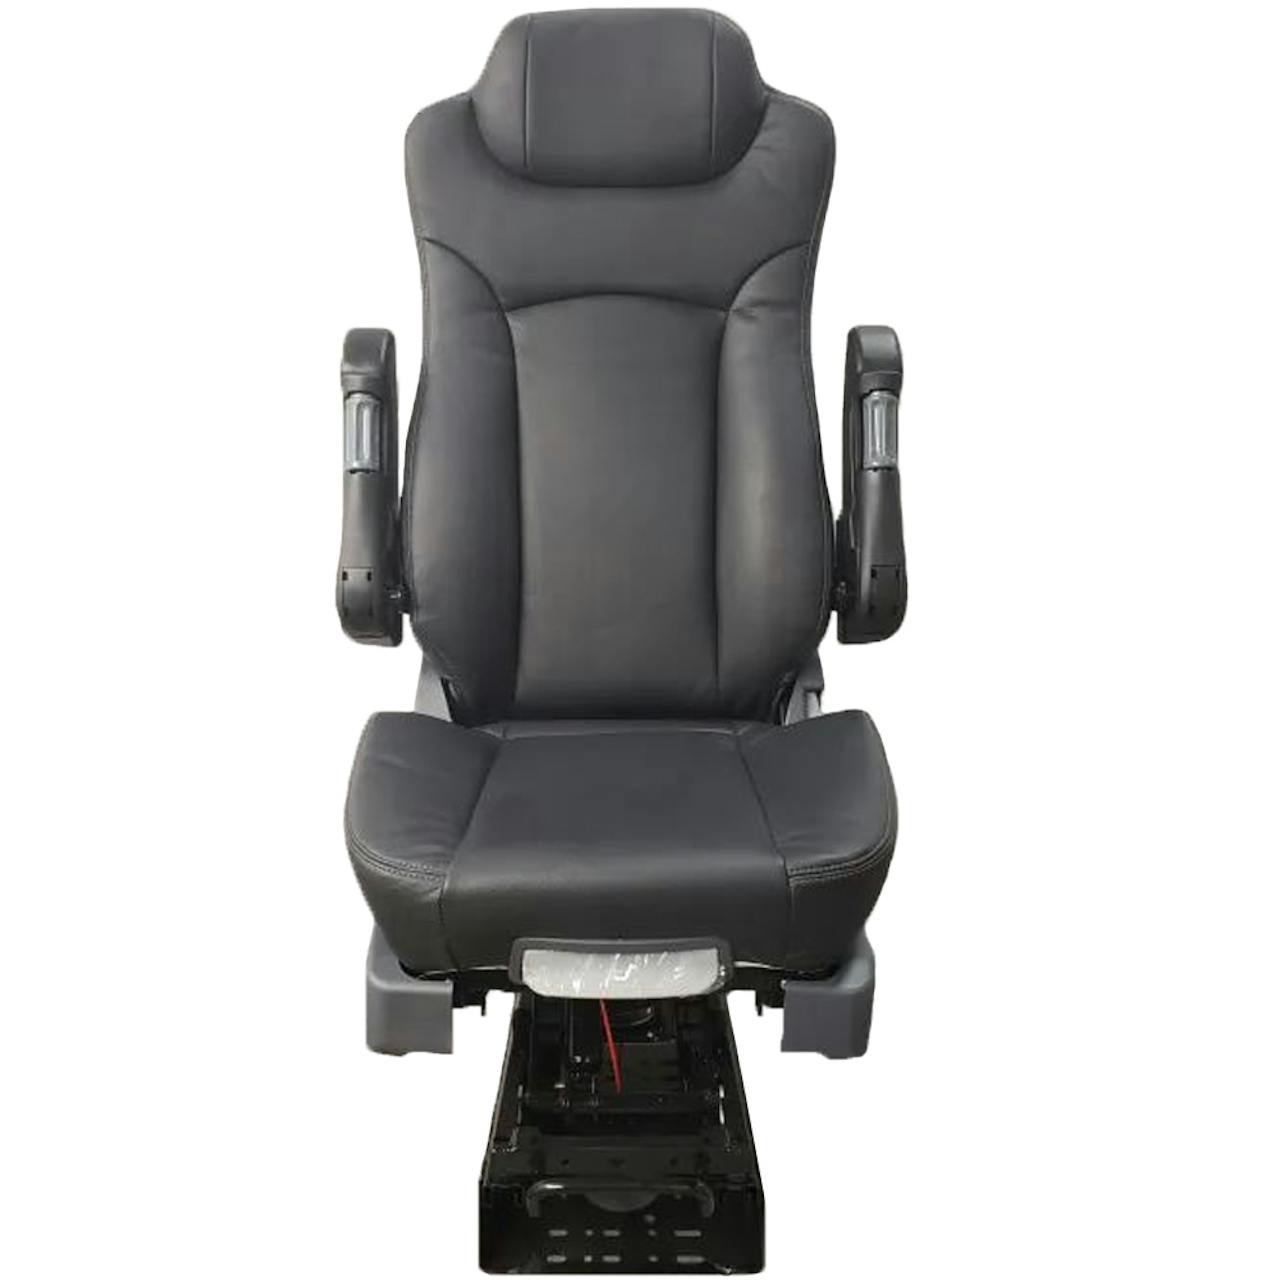 Prime TC300 Series Air Ride Suspension Genuine Grey/Black Leather Truck Seat with Arm Rests